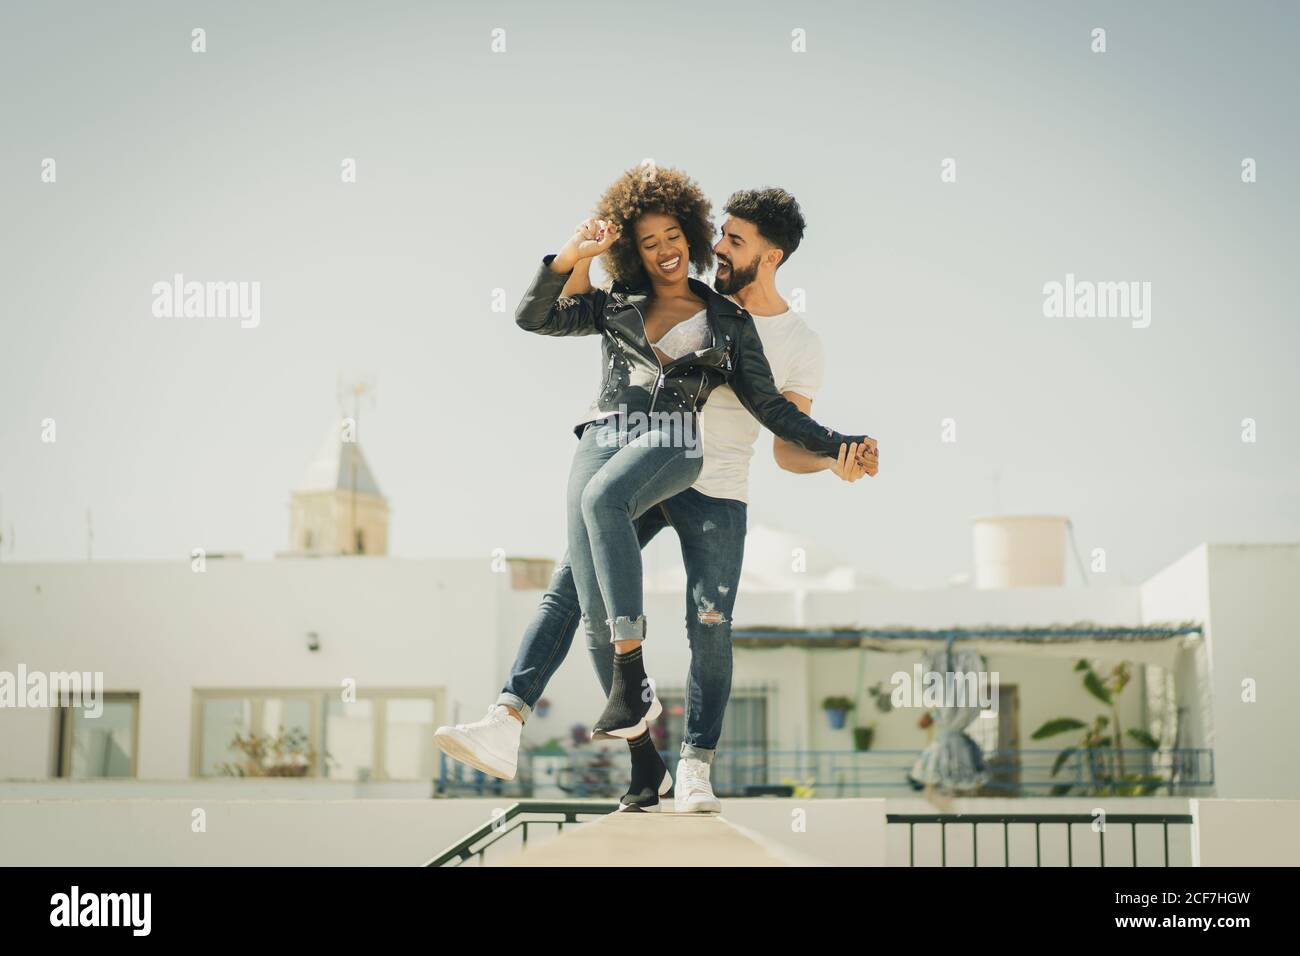 Multiracial man and Woman laughing and balancing on wall while having fun on city street during date Stock Photo